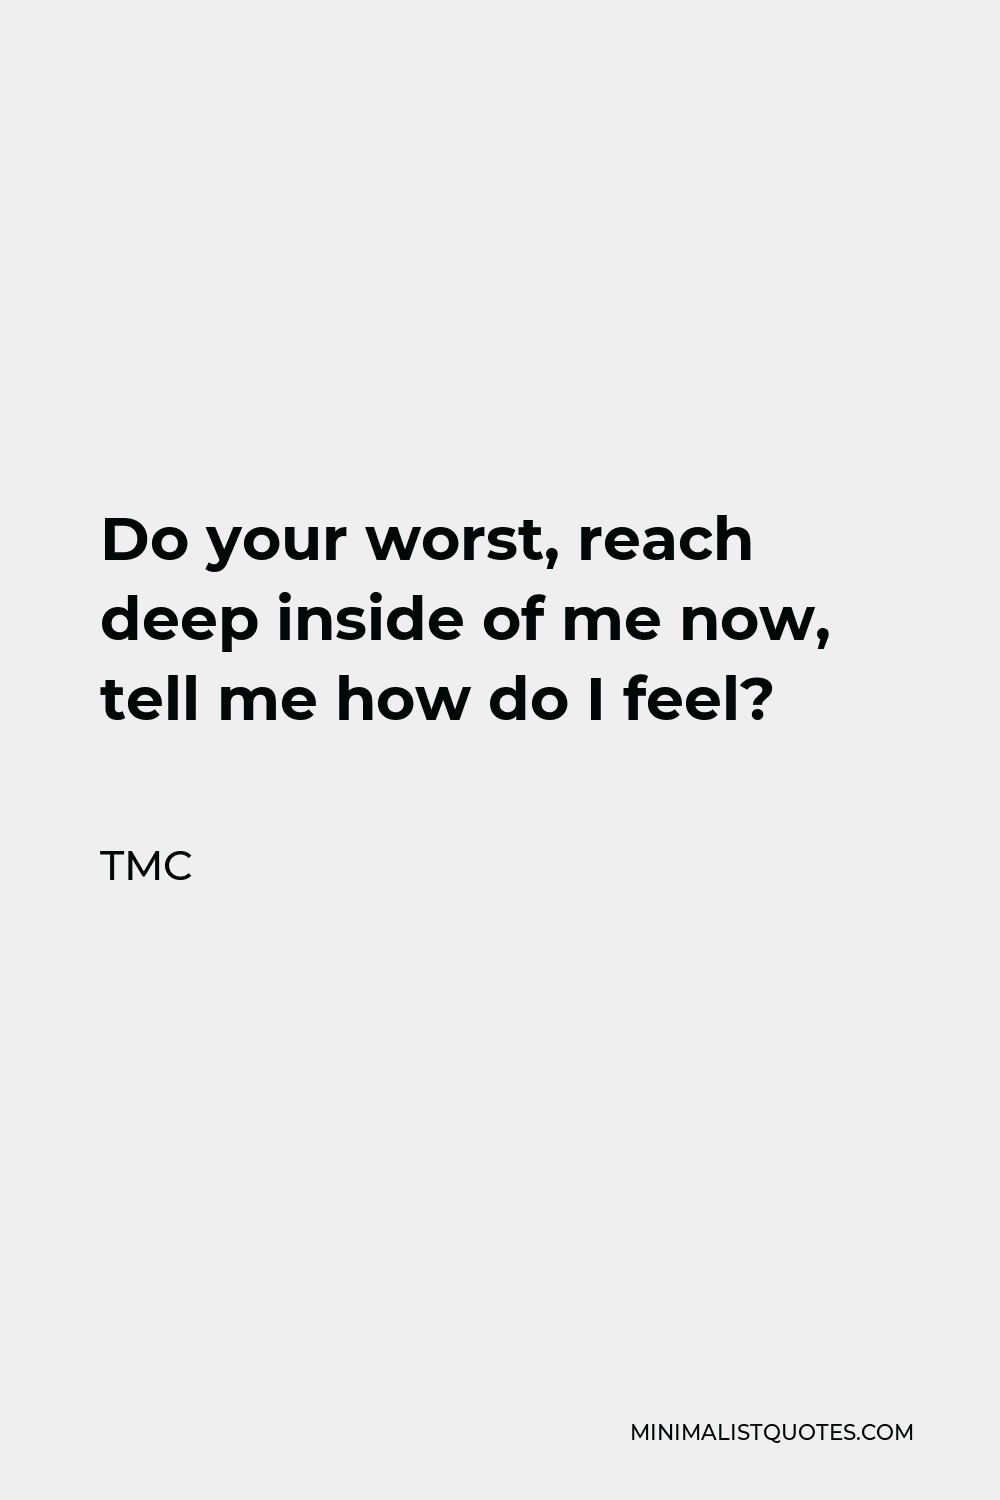 TMC Quote - Do your worst, reach deep inside of me now, tell me how do I feel?